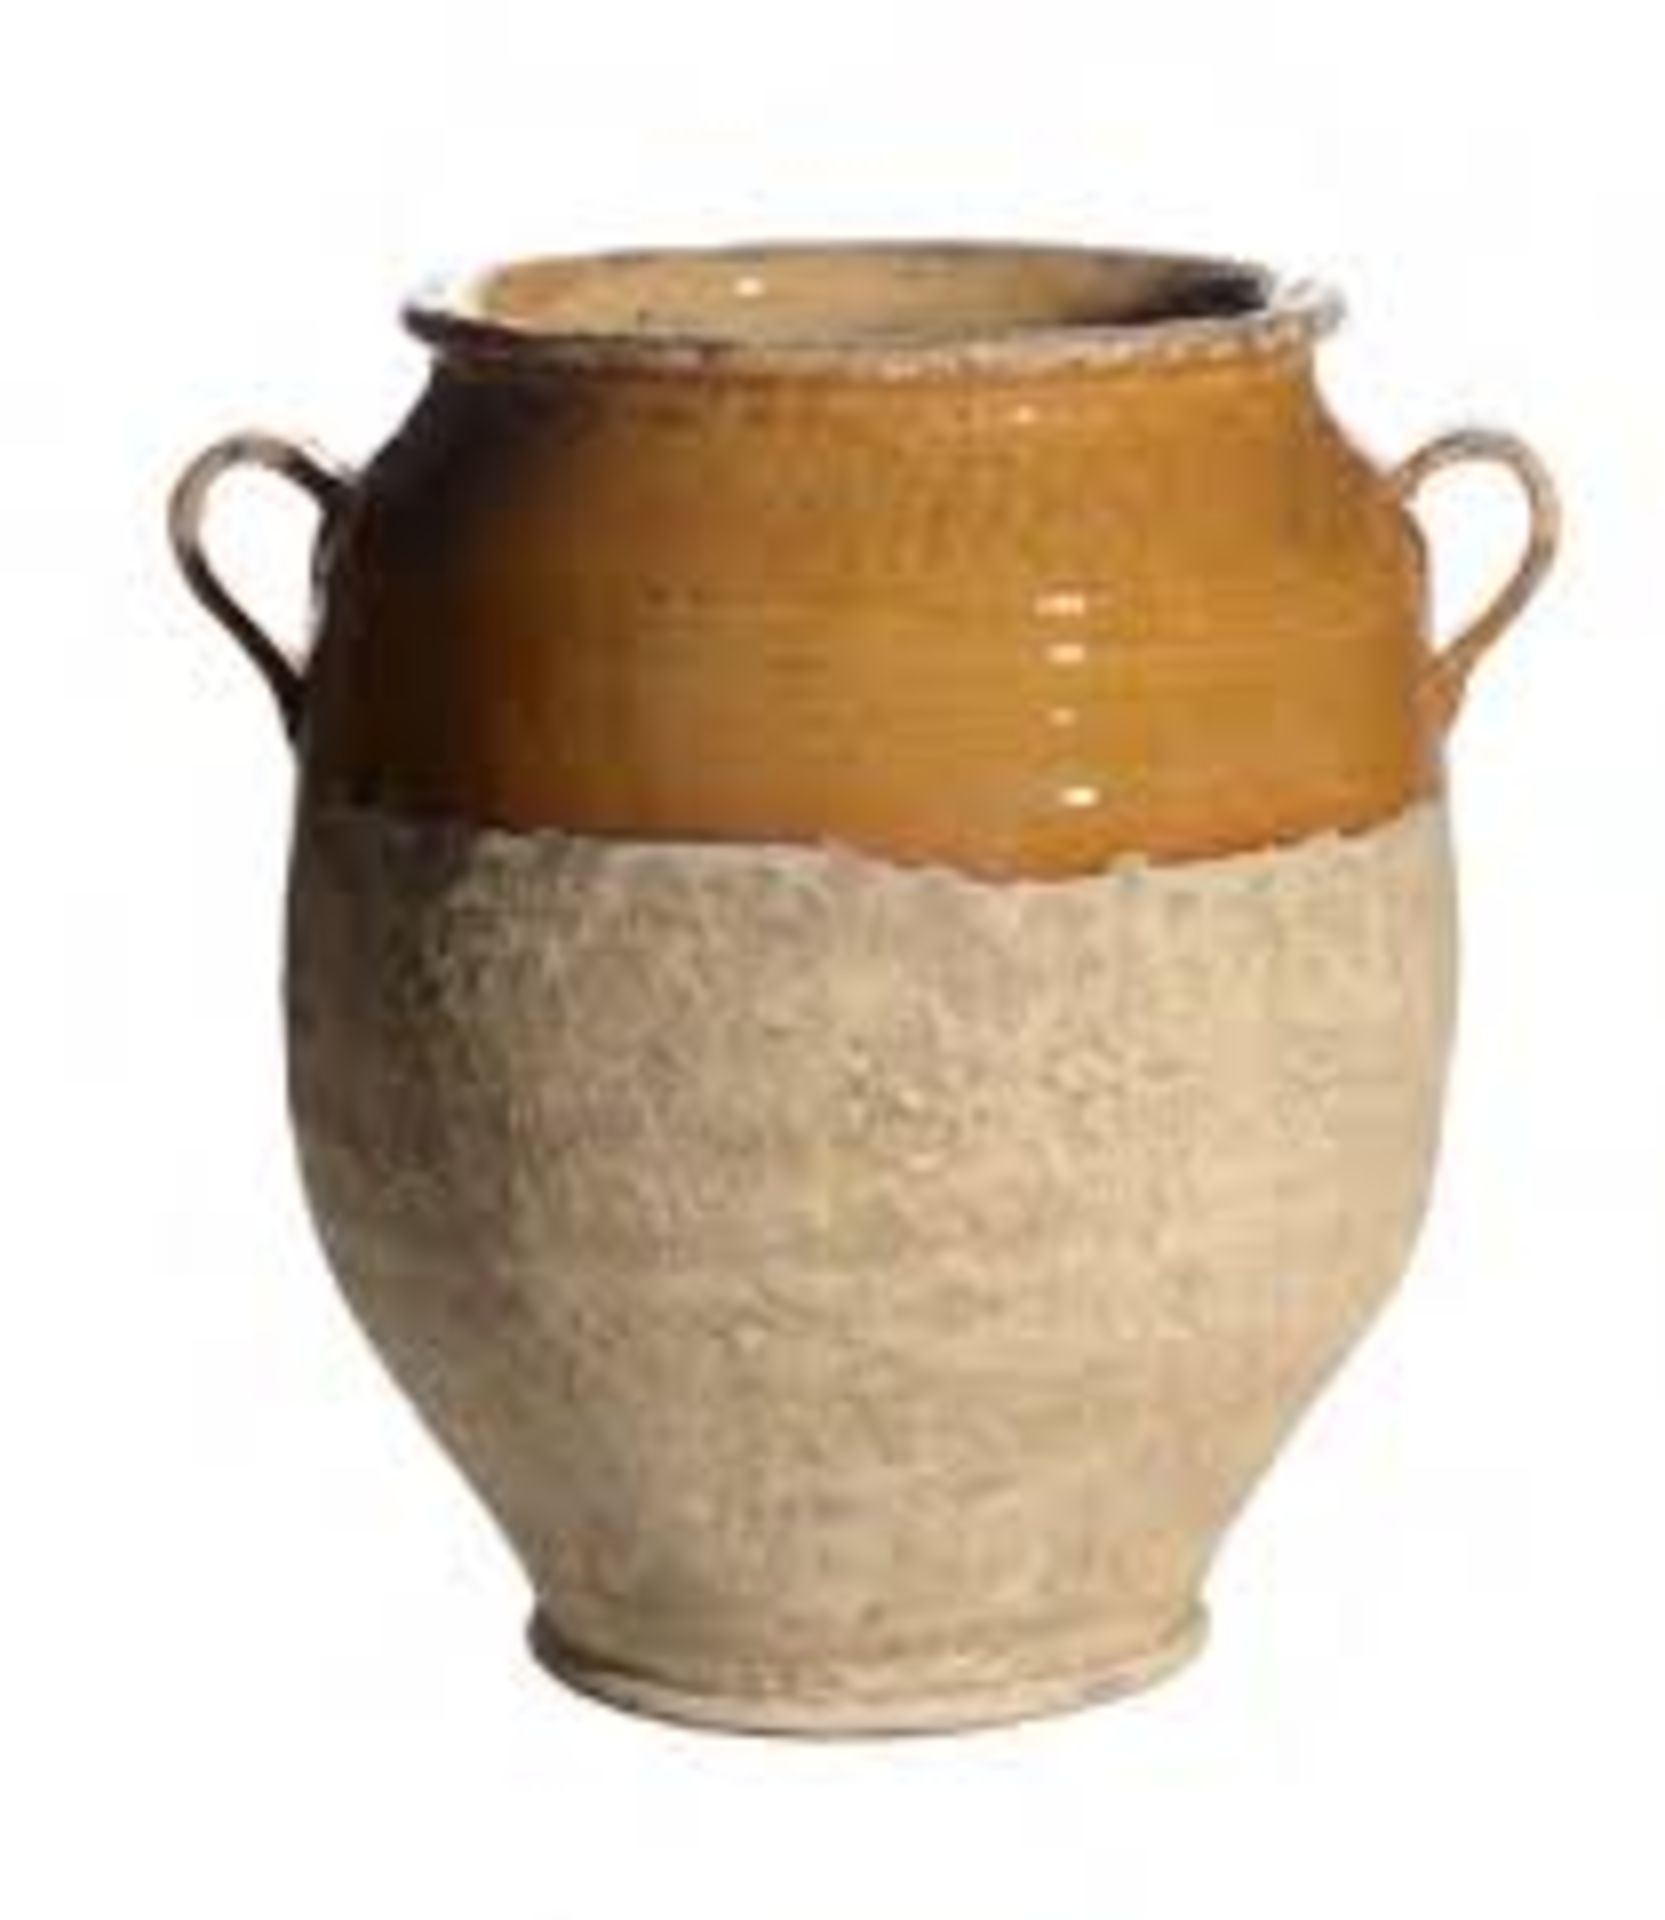 Antique Weathering Jar The Pots Are Handcrafted And Take Up To Six Weeks To Make. We Blend Fine